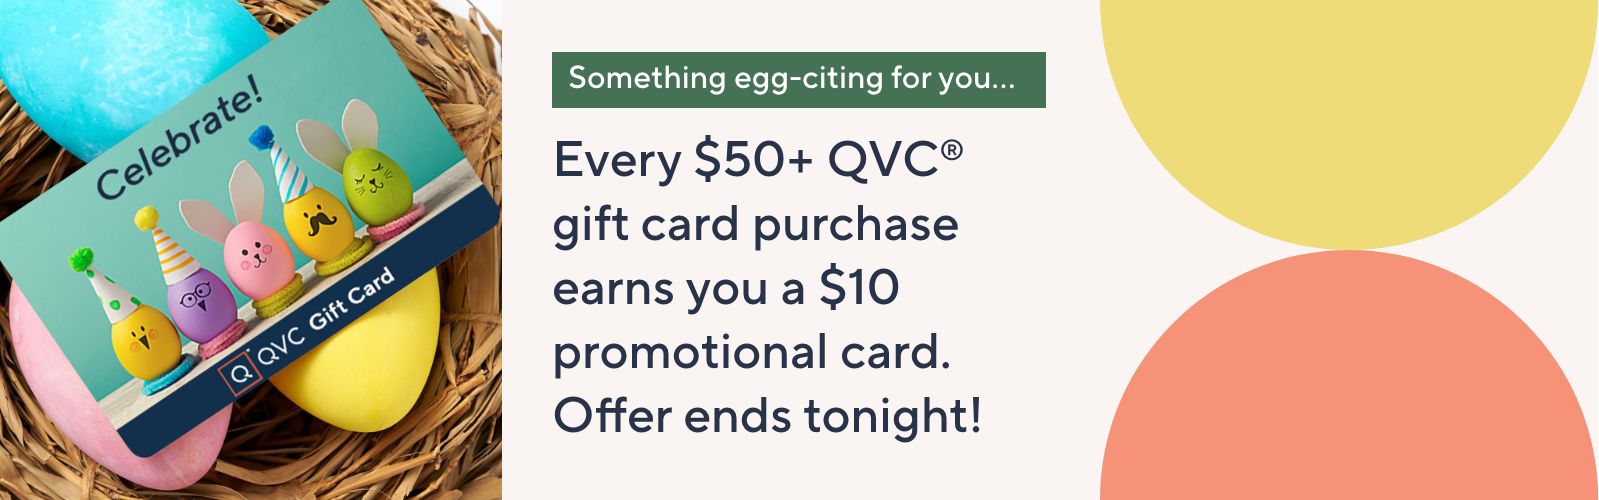 Something egg-citing for you… Every $50+ QVC® gift card purchase earns you a $10 promotional card. Offer ends tonight!